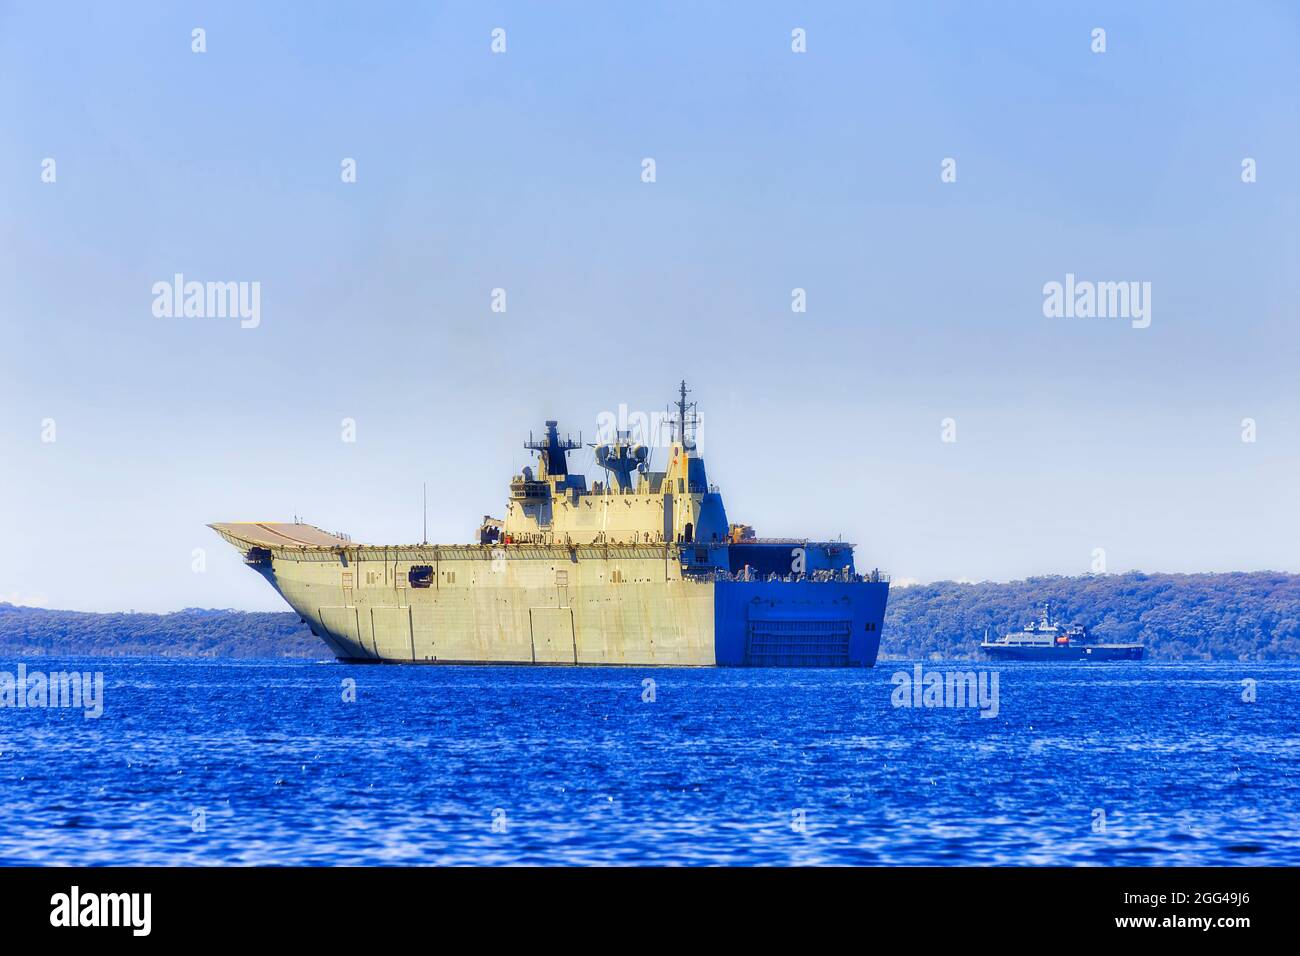 Her Majesty Australian Ship on naval exercise in Jervis Bay of Pacific coast in Australia - flagship helicopter carrier LHD giant. Stock Photo